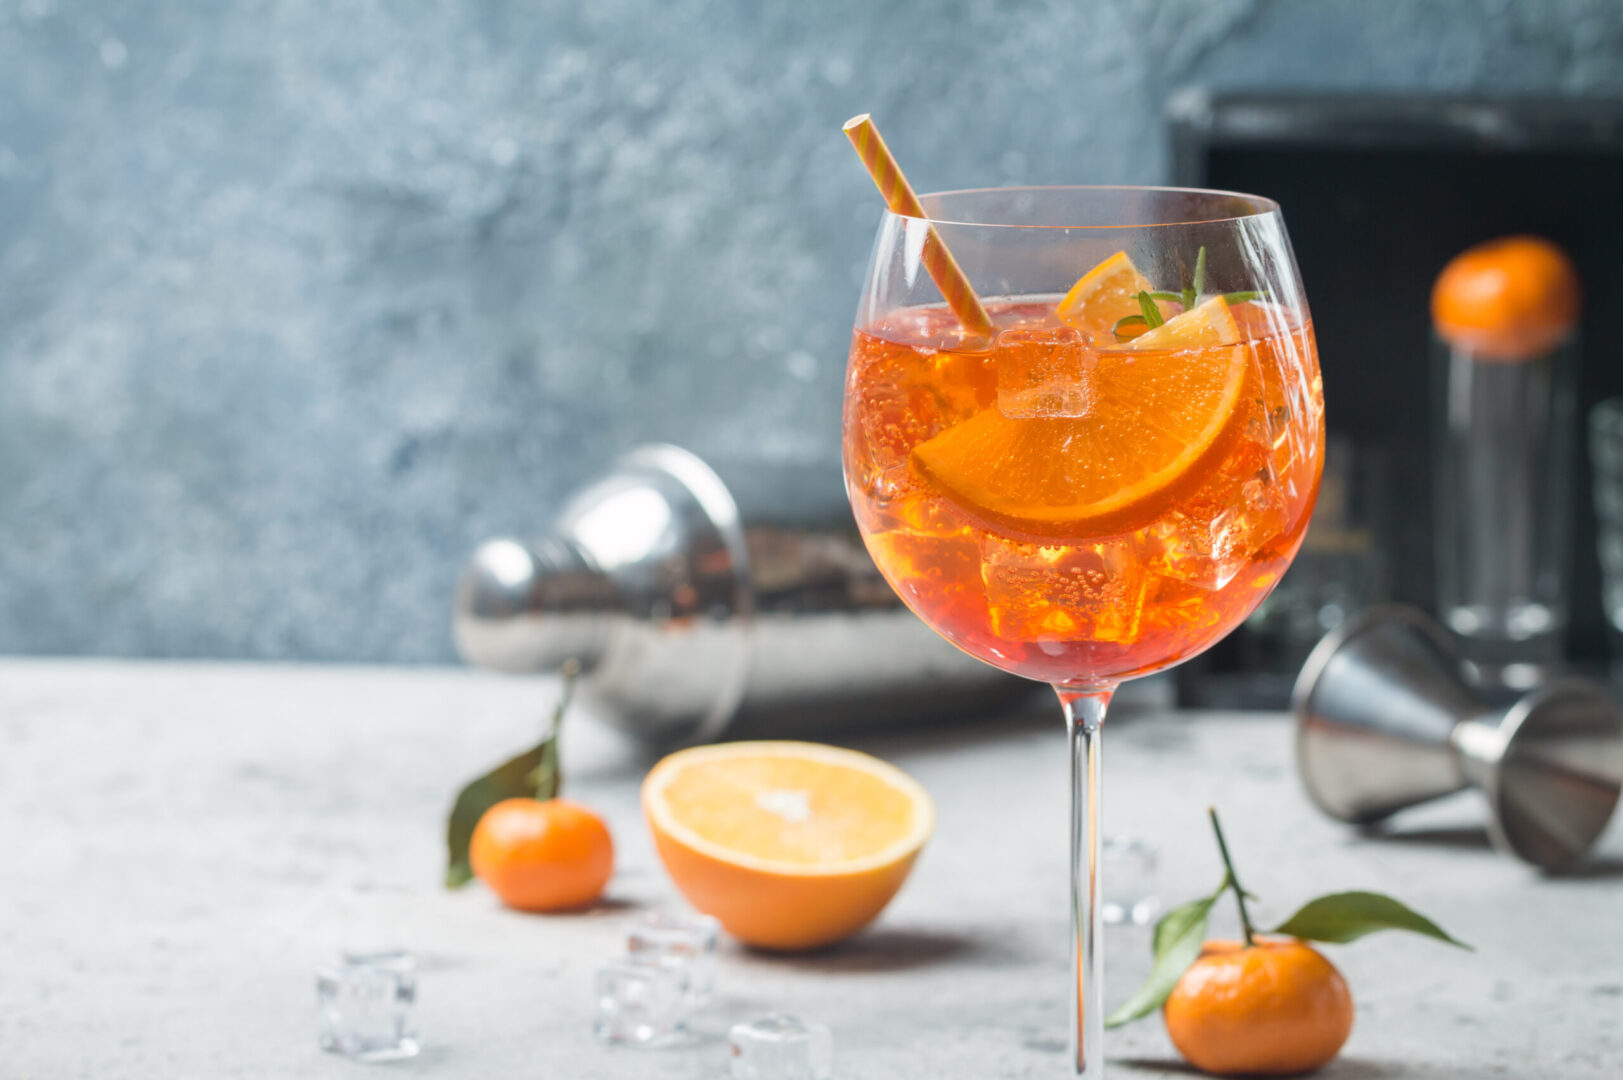 Classic Italian Aperol spritz cocktail in glass on gray background